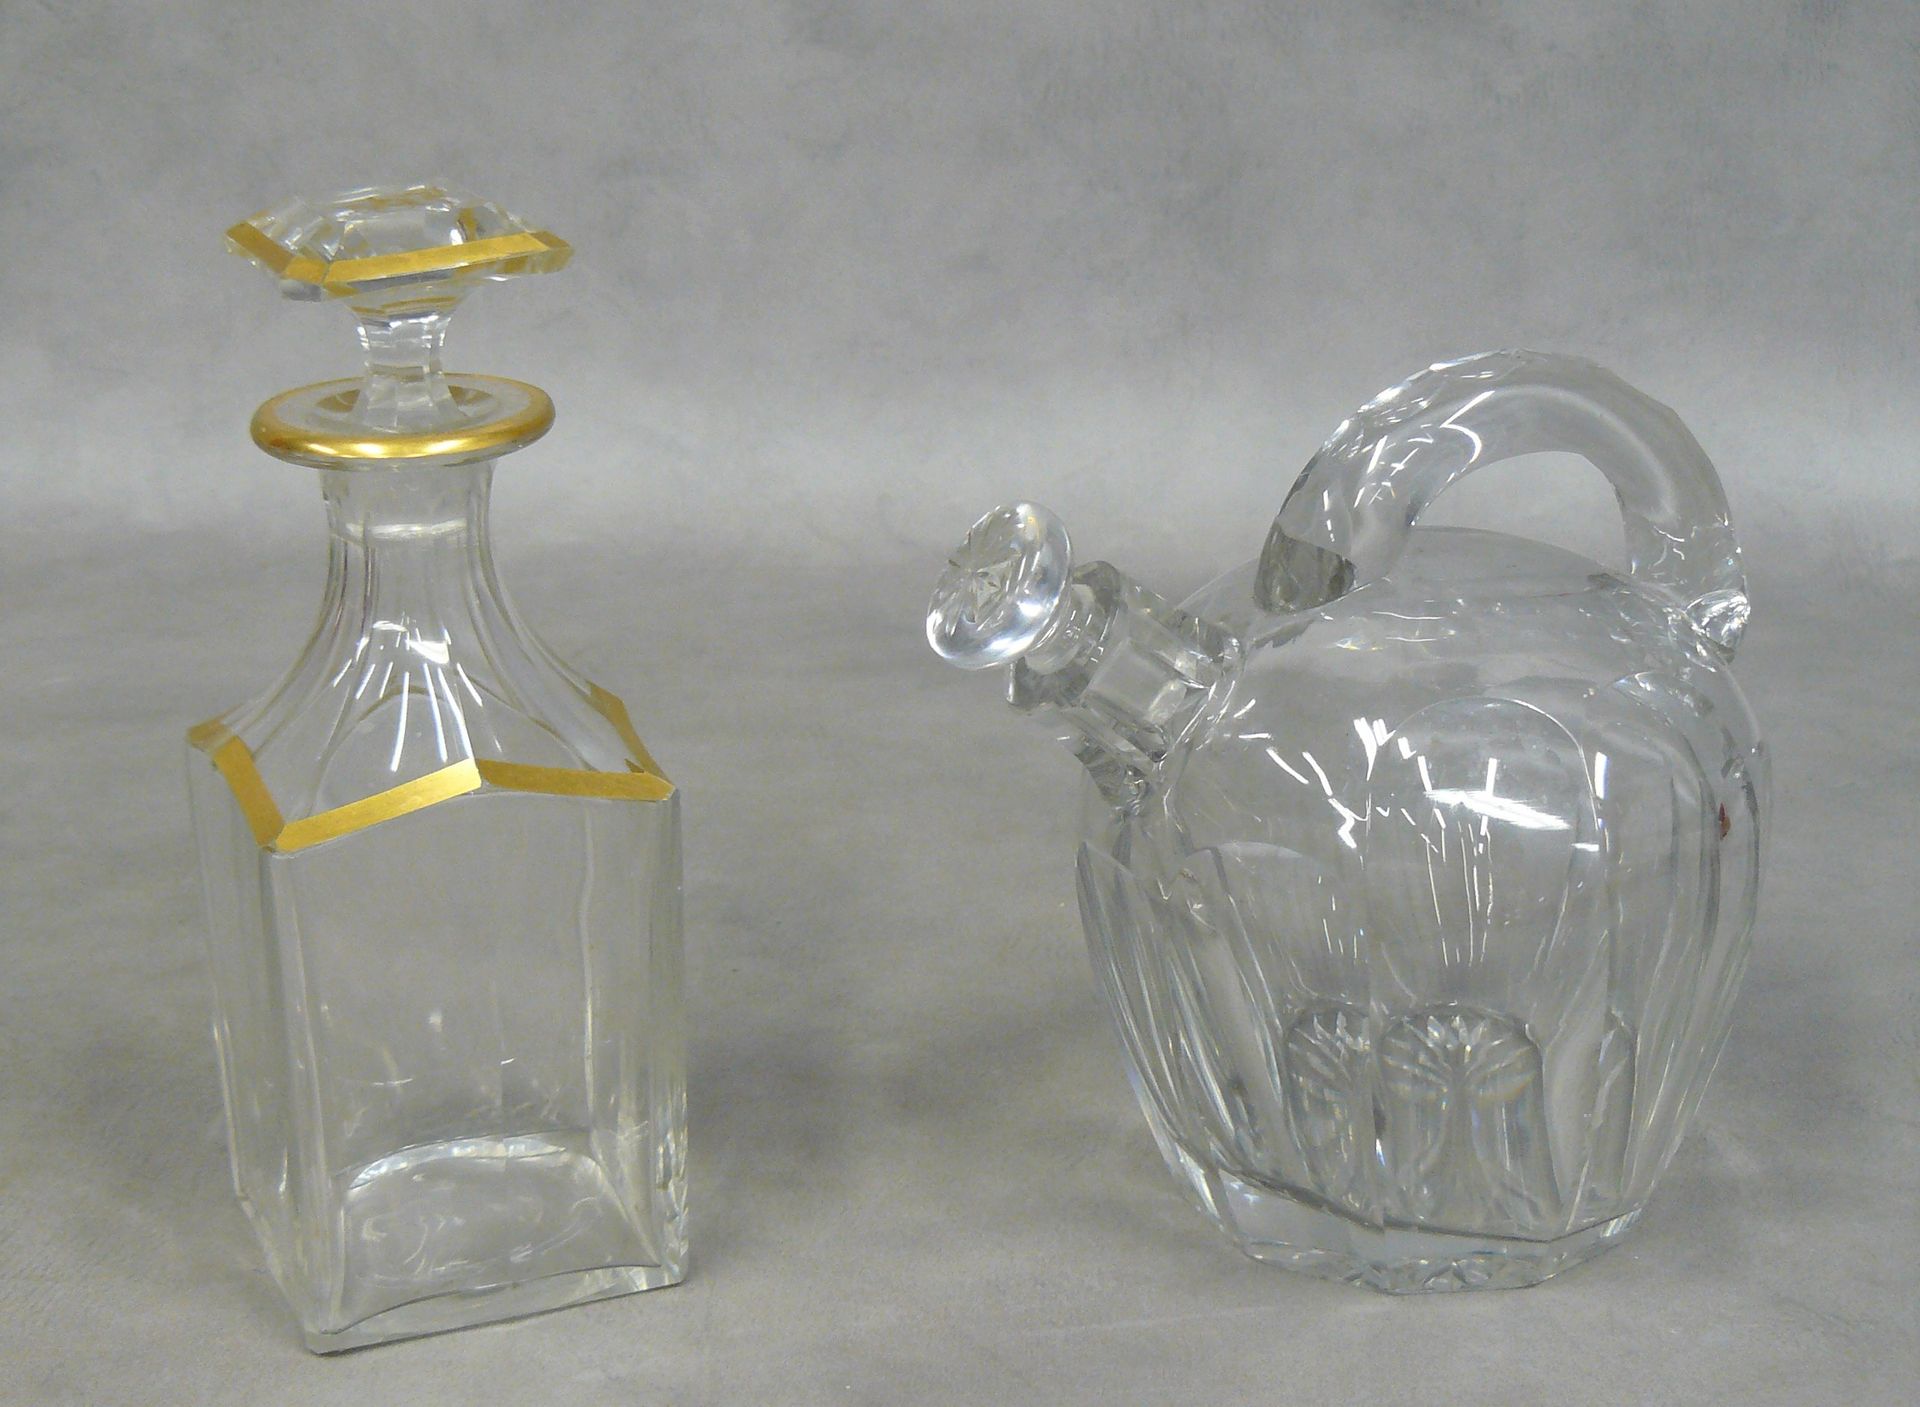 Null a square decanter with a golden stopper and a watering can decanter